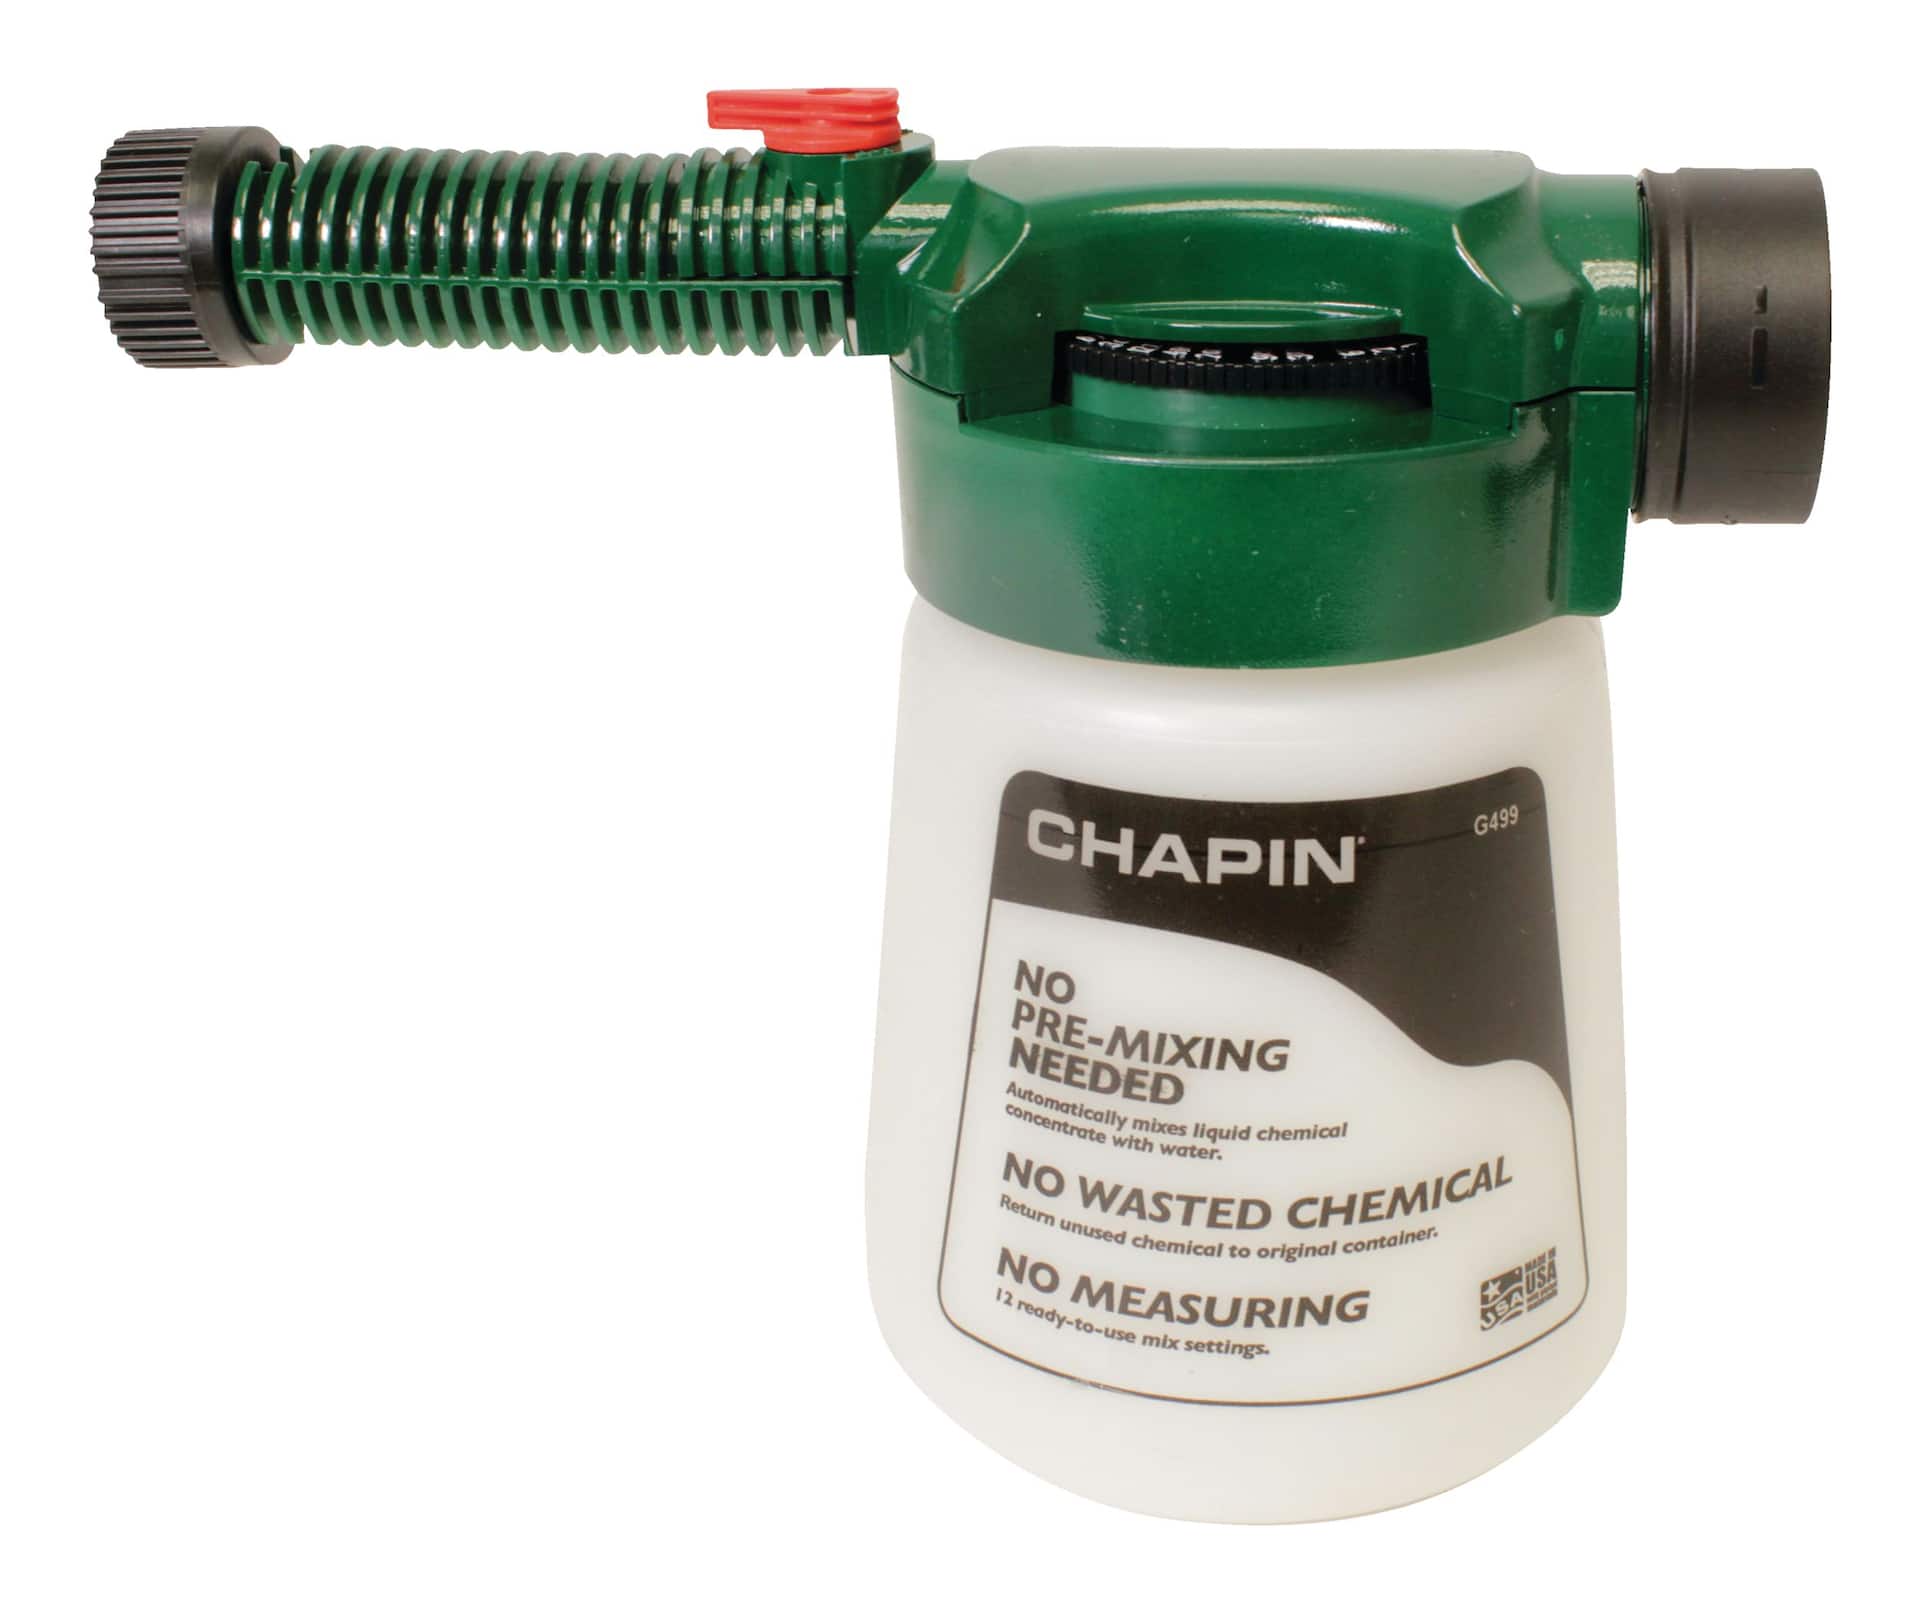 https://media-www.canadiantire.ca/product/seasonal-gardening/gardening/weed-insect-rodent-control/1591036/chapin-select-n-spray-end-5f821fd8-cfa4-4113-a2d5-2e9ee1ebefd4-jpgrendition.jpg